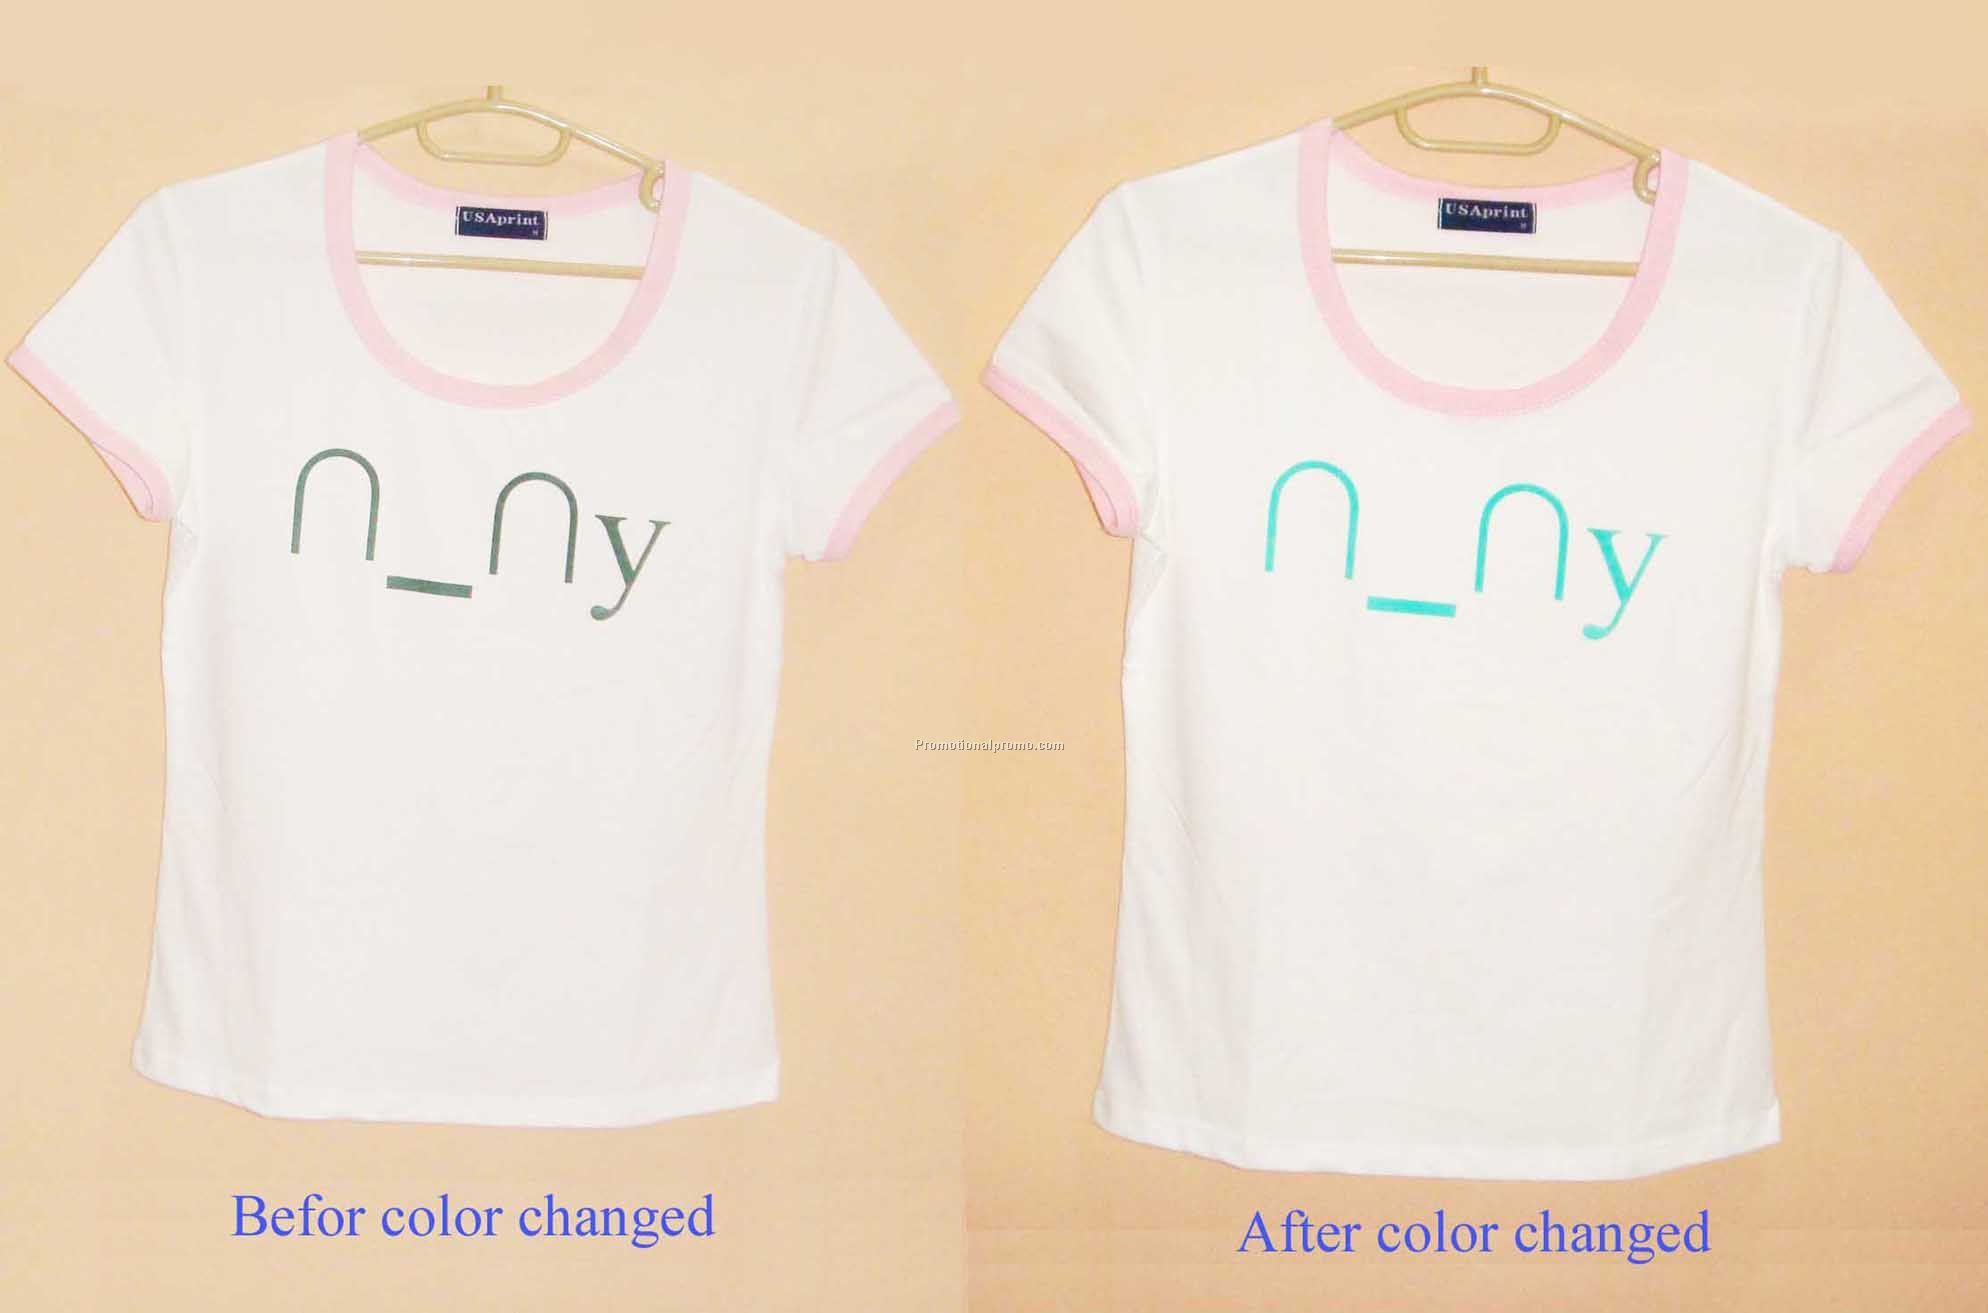 Color changed T-shirt